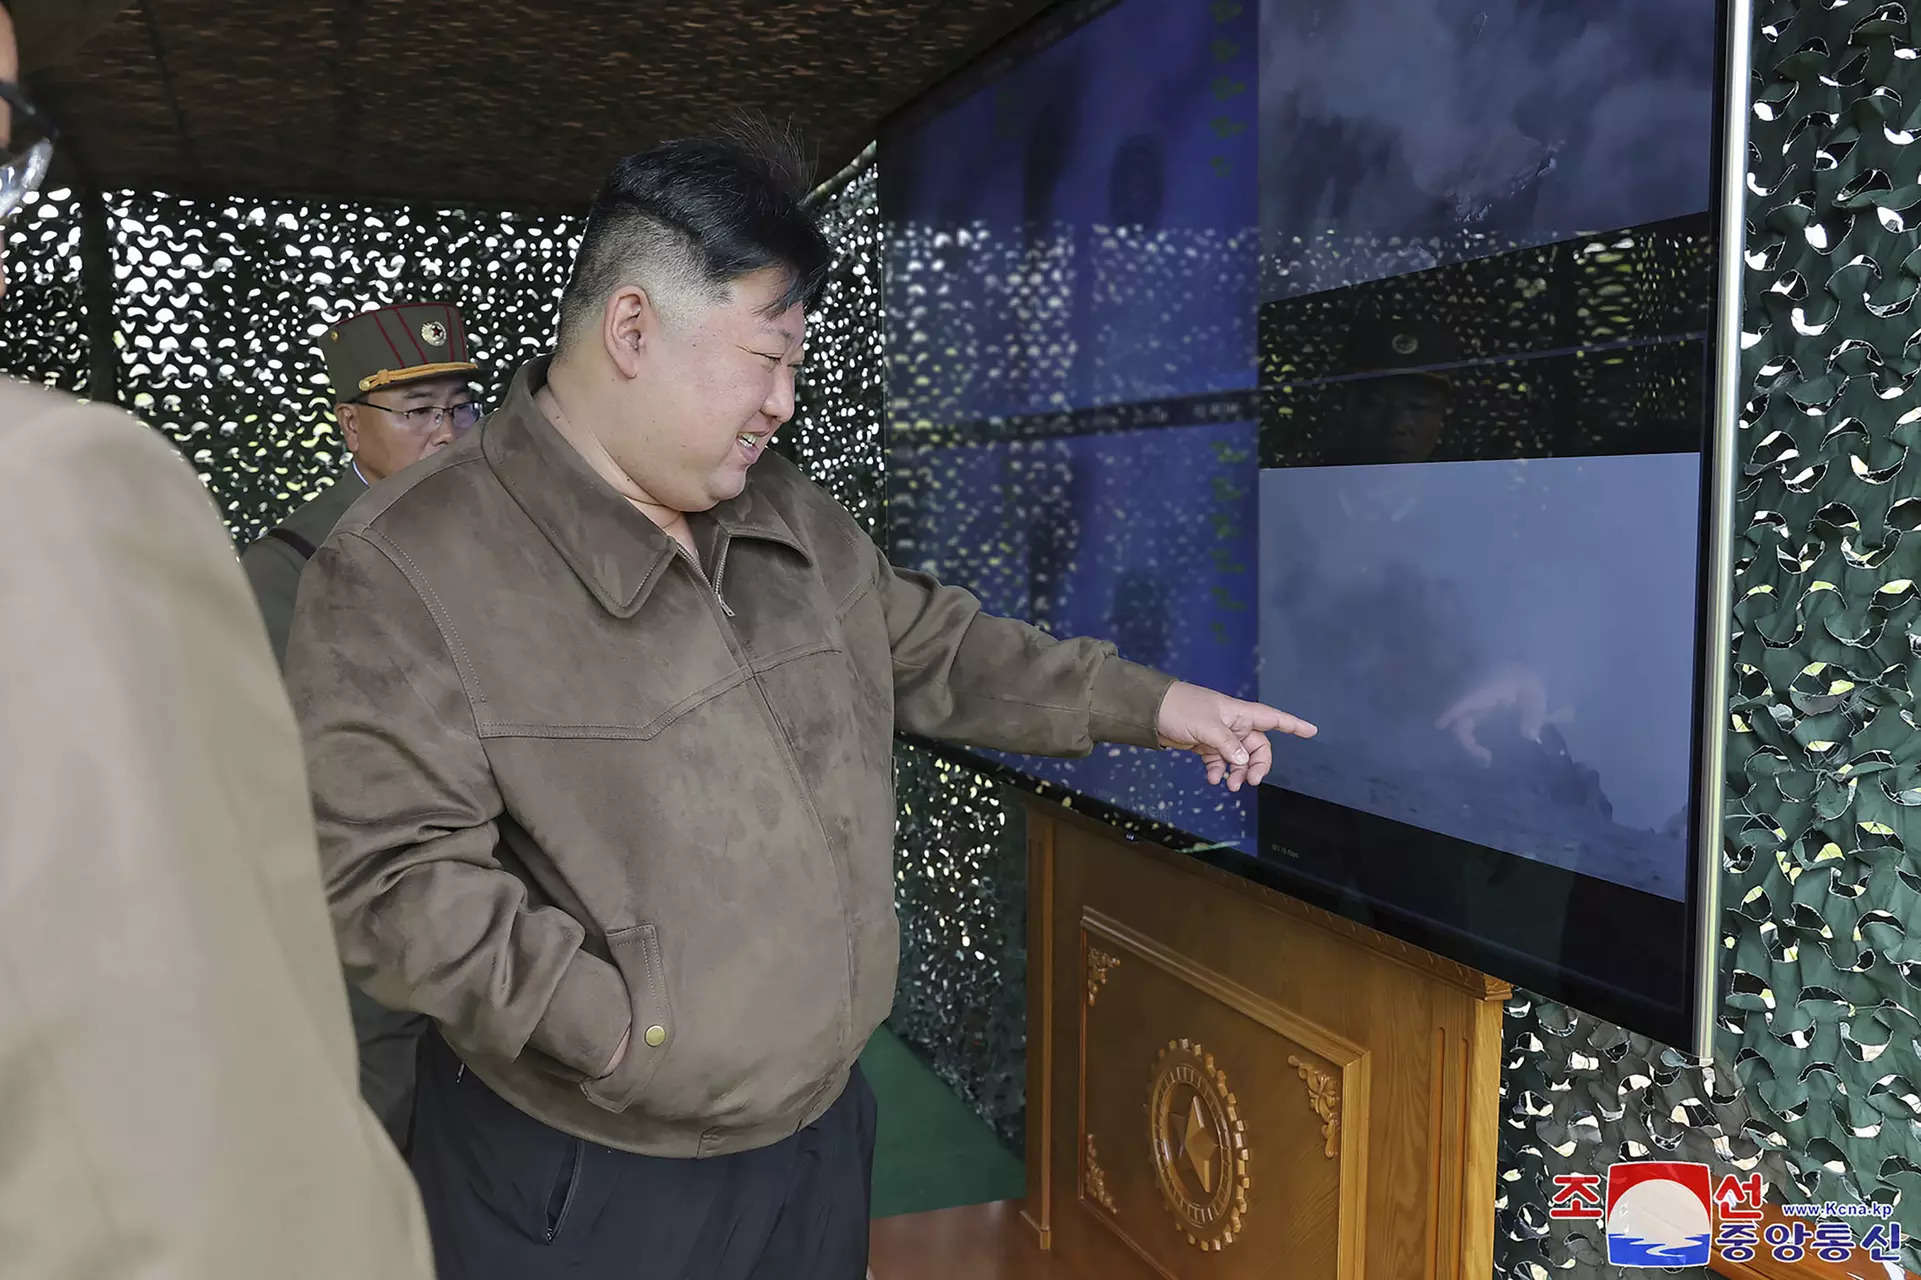 North Korea secretly recreating Amazon and Max shows? Here's what we know 